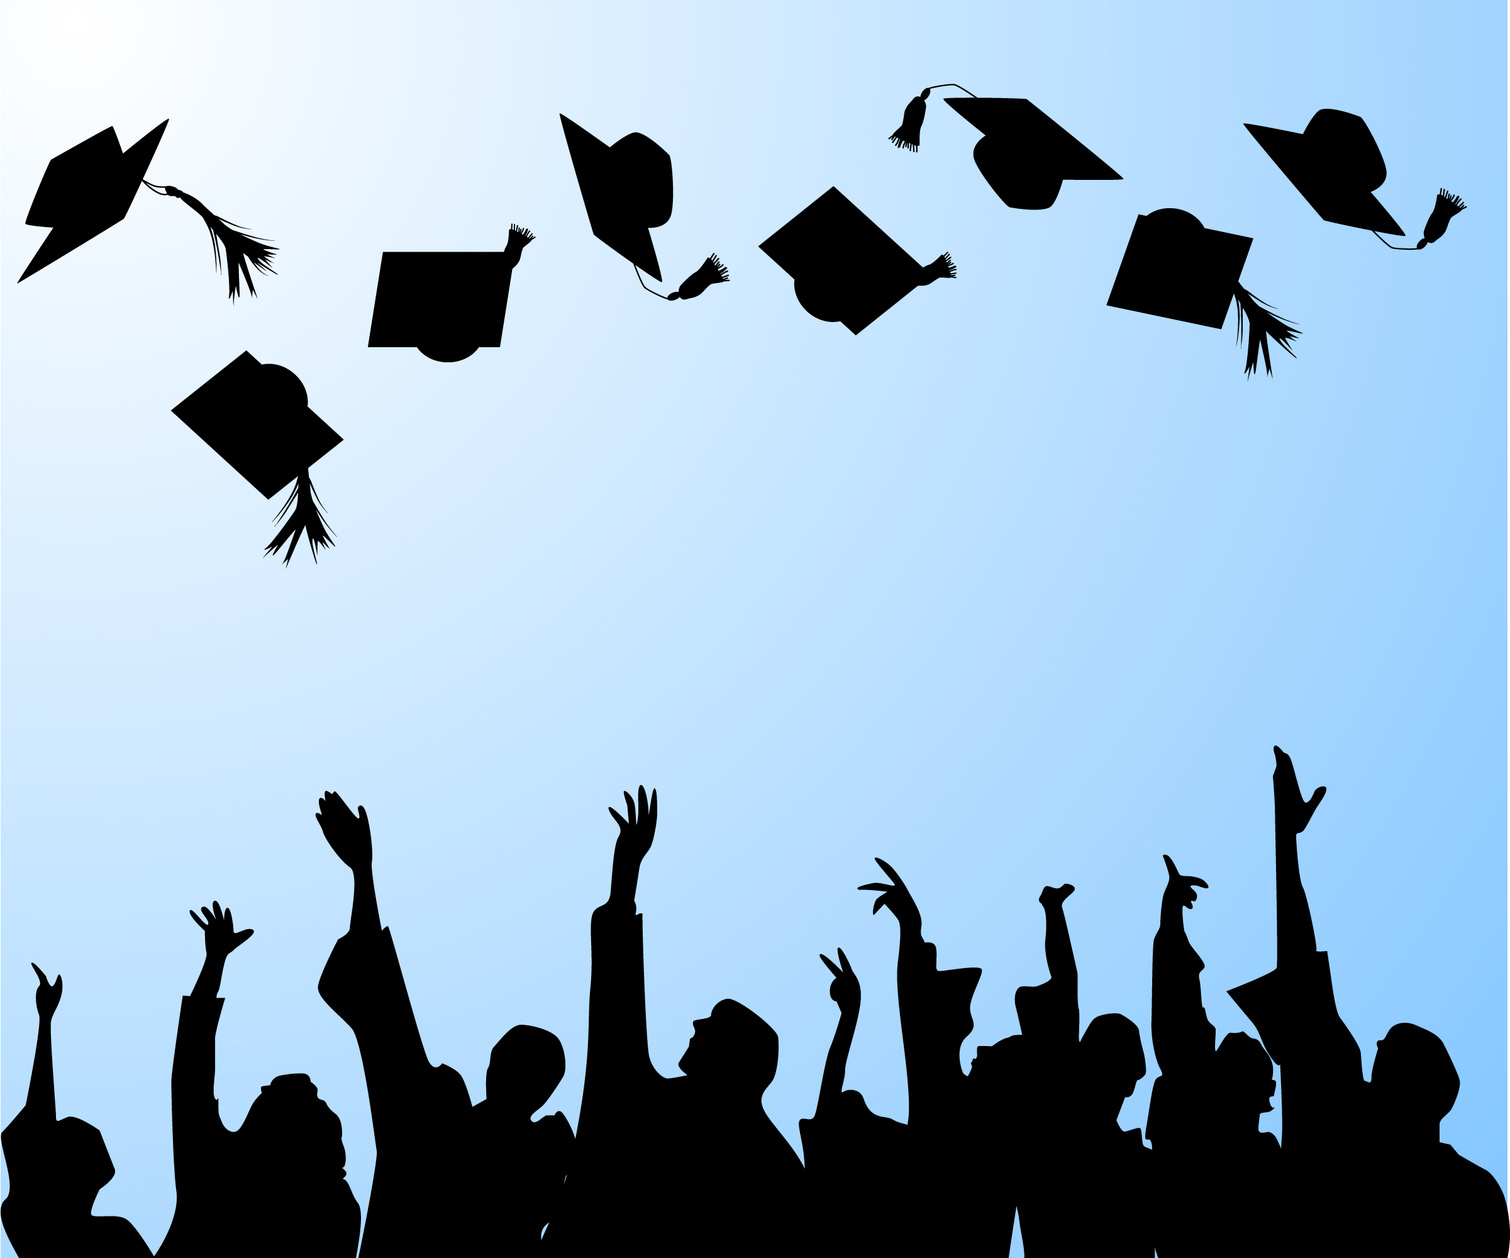 Here's To You, College Graduate « Fujitsu ScanSnap – Welcome to ...